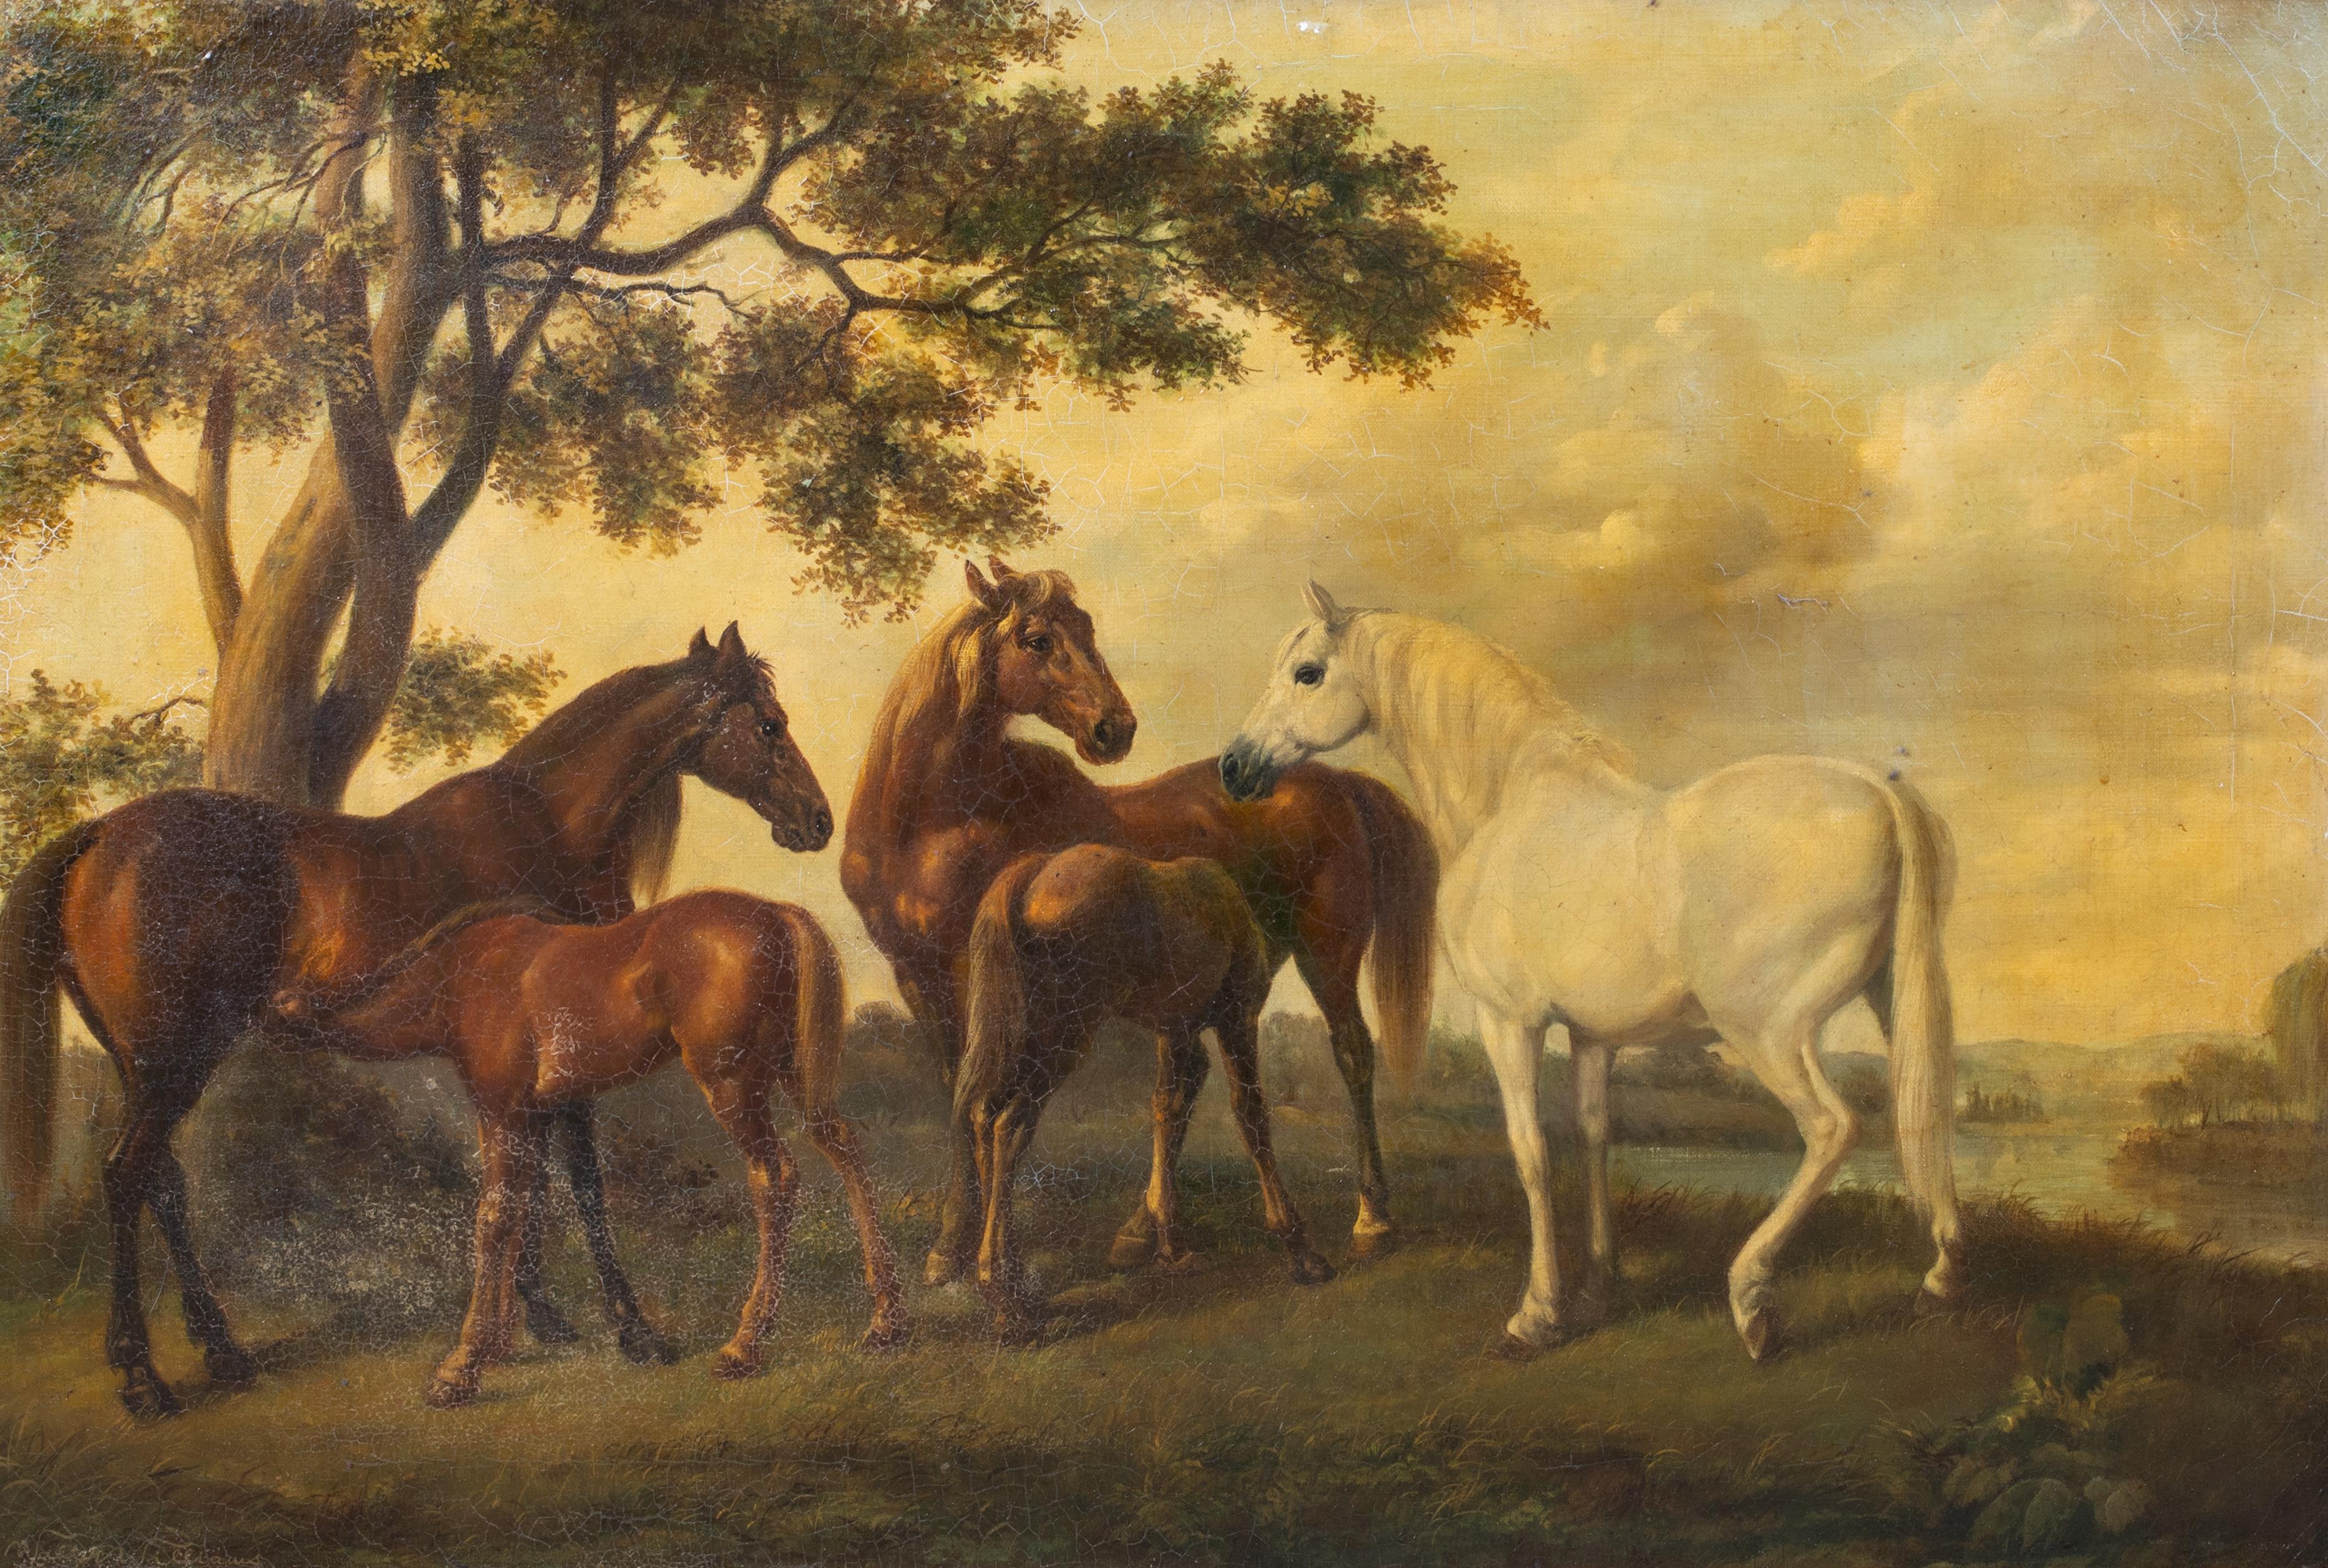 Horses In A Field, 18th/19th Century

after GEORGE STUBBS (1724-1806)

Large 18th/19th Century English scene of horses in a field, oil on canvas. Excellent quality work that would be enhanced with a professional clean of various horses and foals